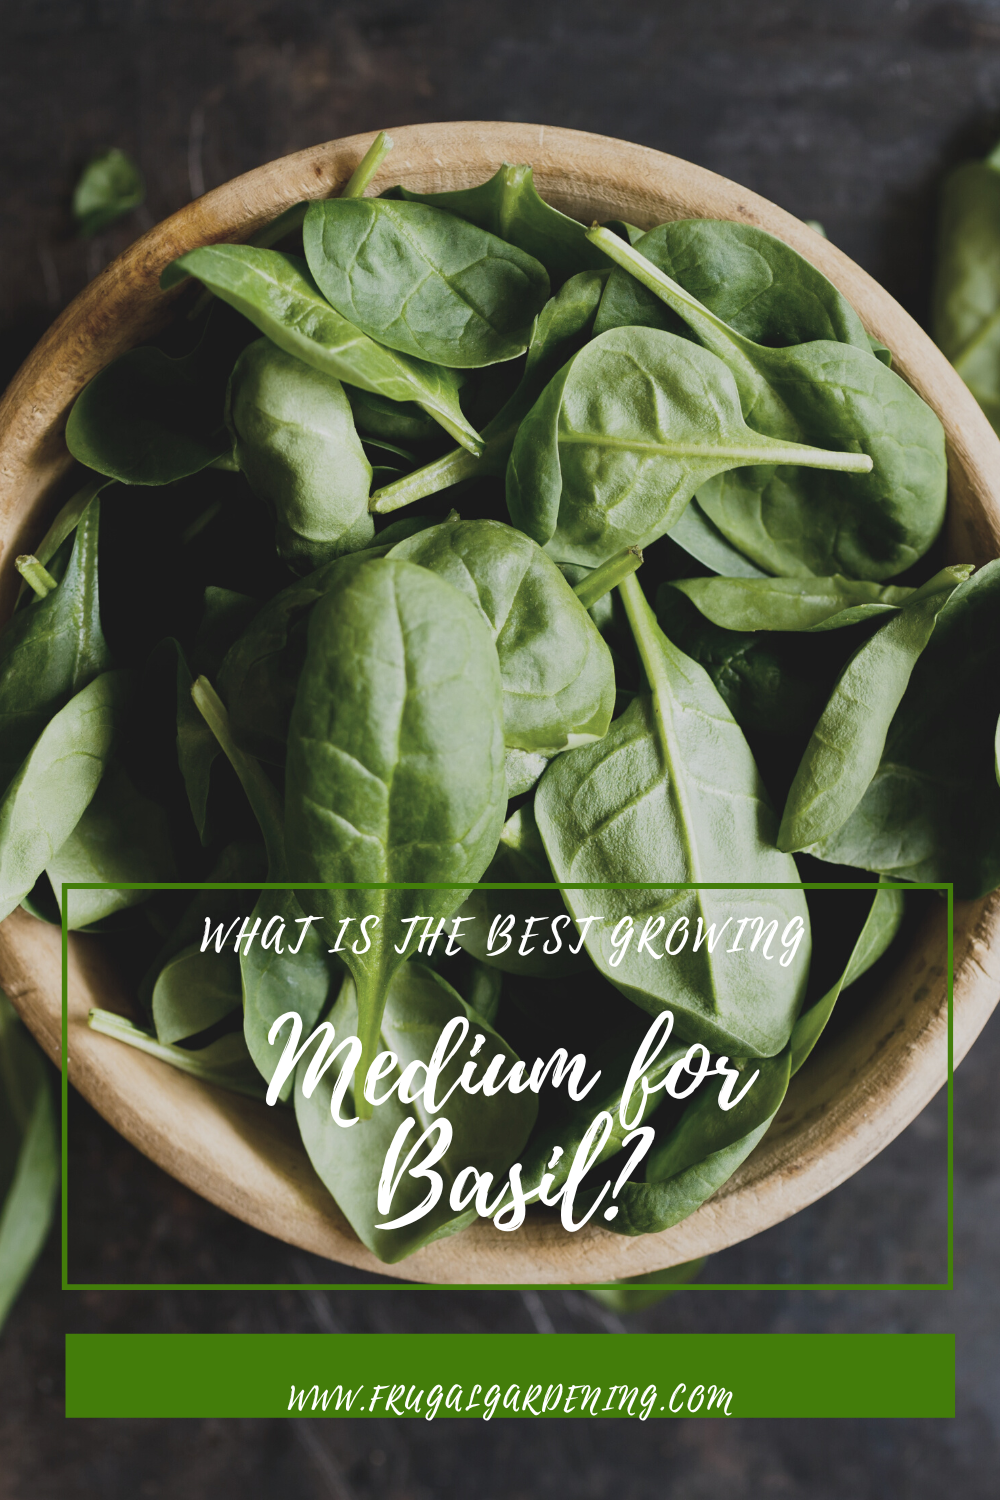 What Is the Best Growing Medium for Basil